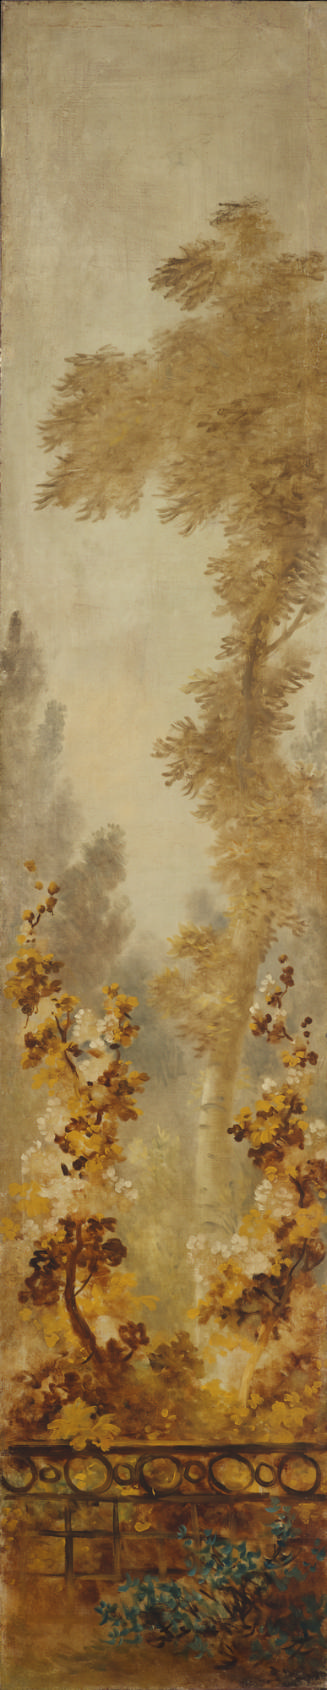 oil painting of a landscape with a fence, trees, and flowering plants